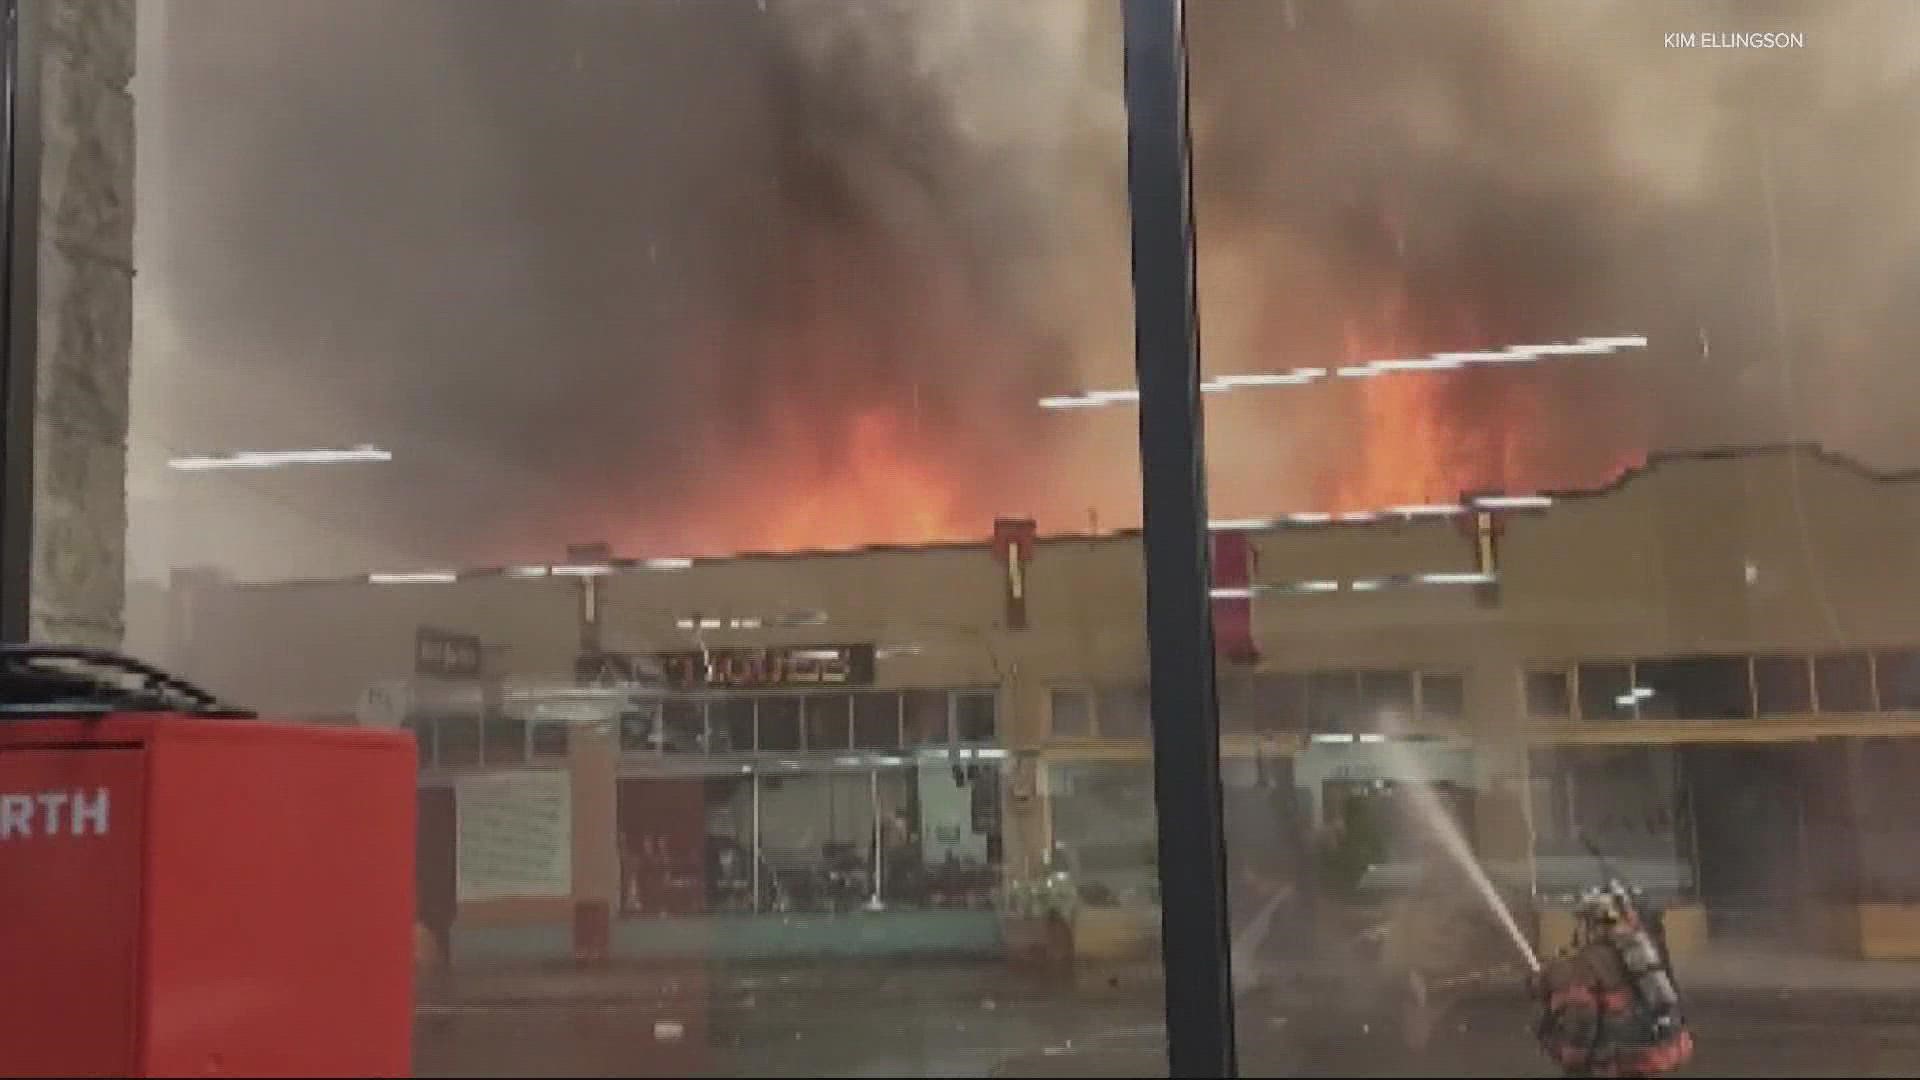 The lawsuit alleges that the fire originated in Lounge Lizard's ventilation system and accuses the shop's owners of negligence. KGW's Galen Ettlin reports.